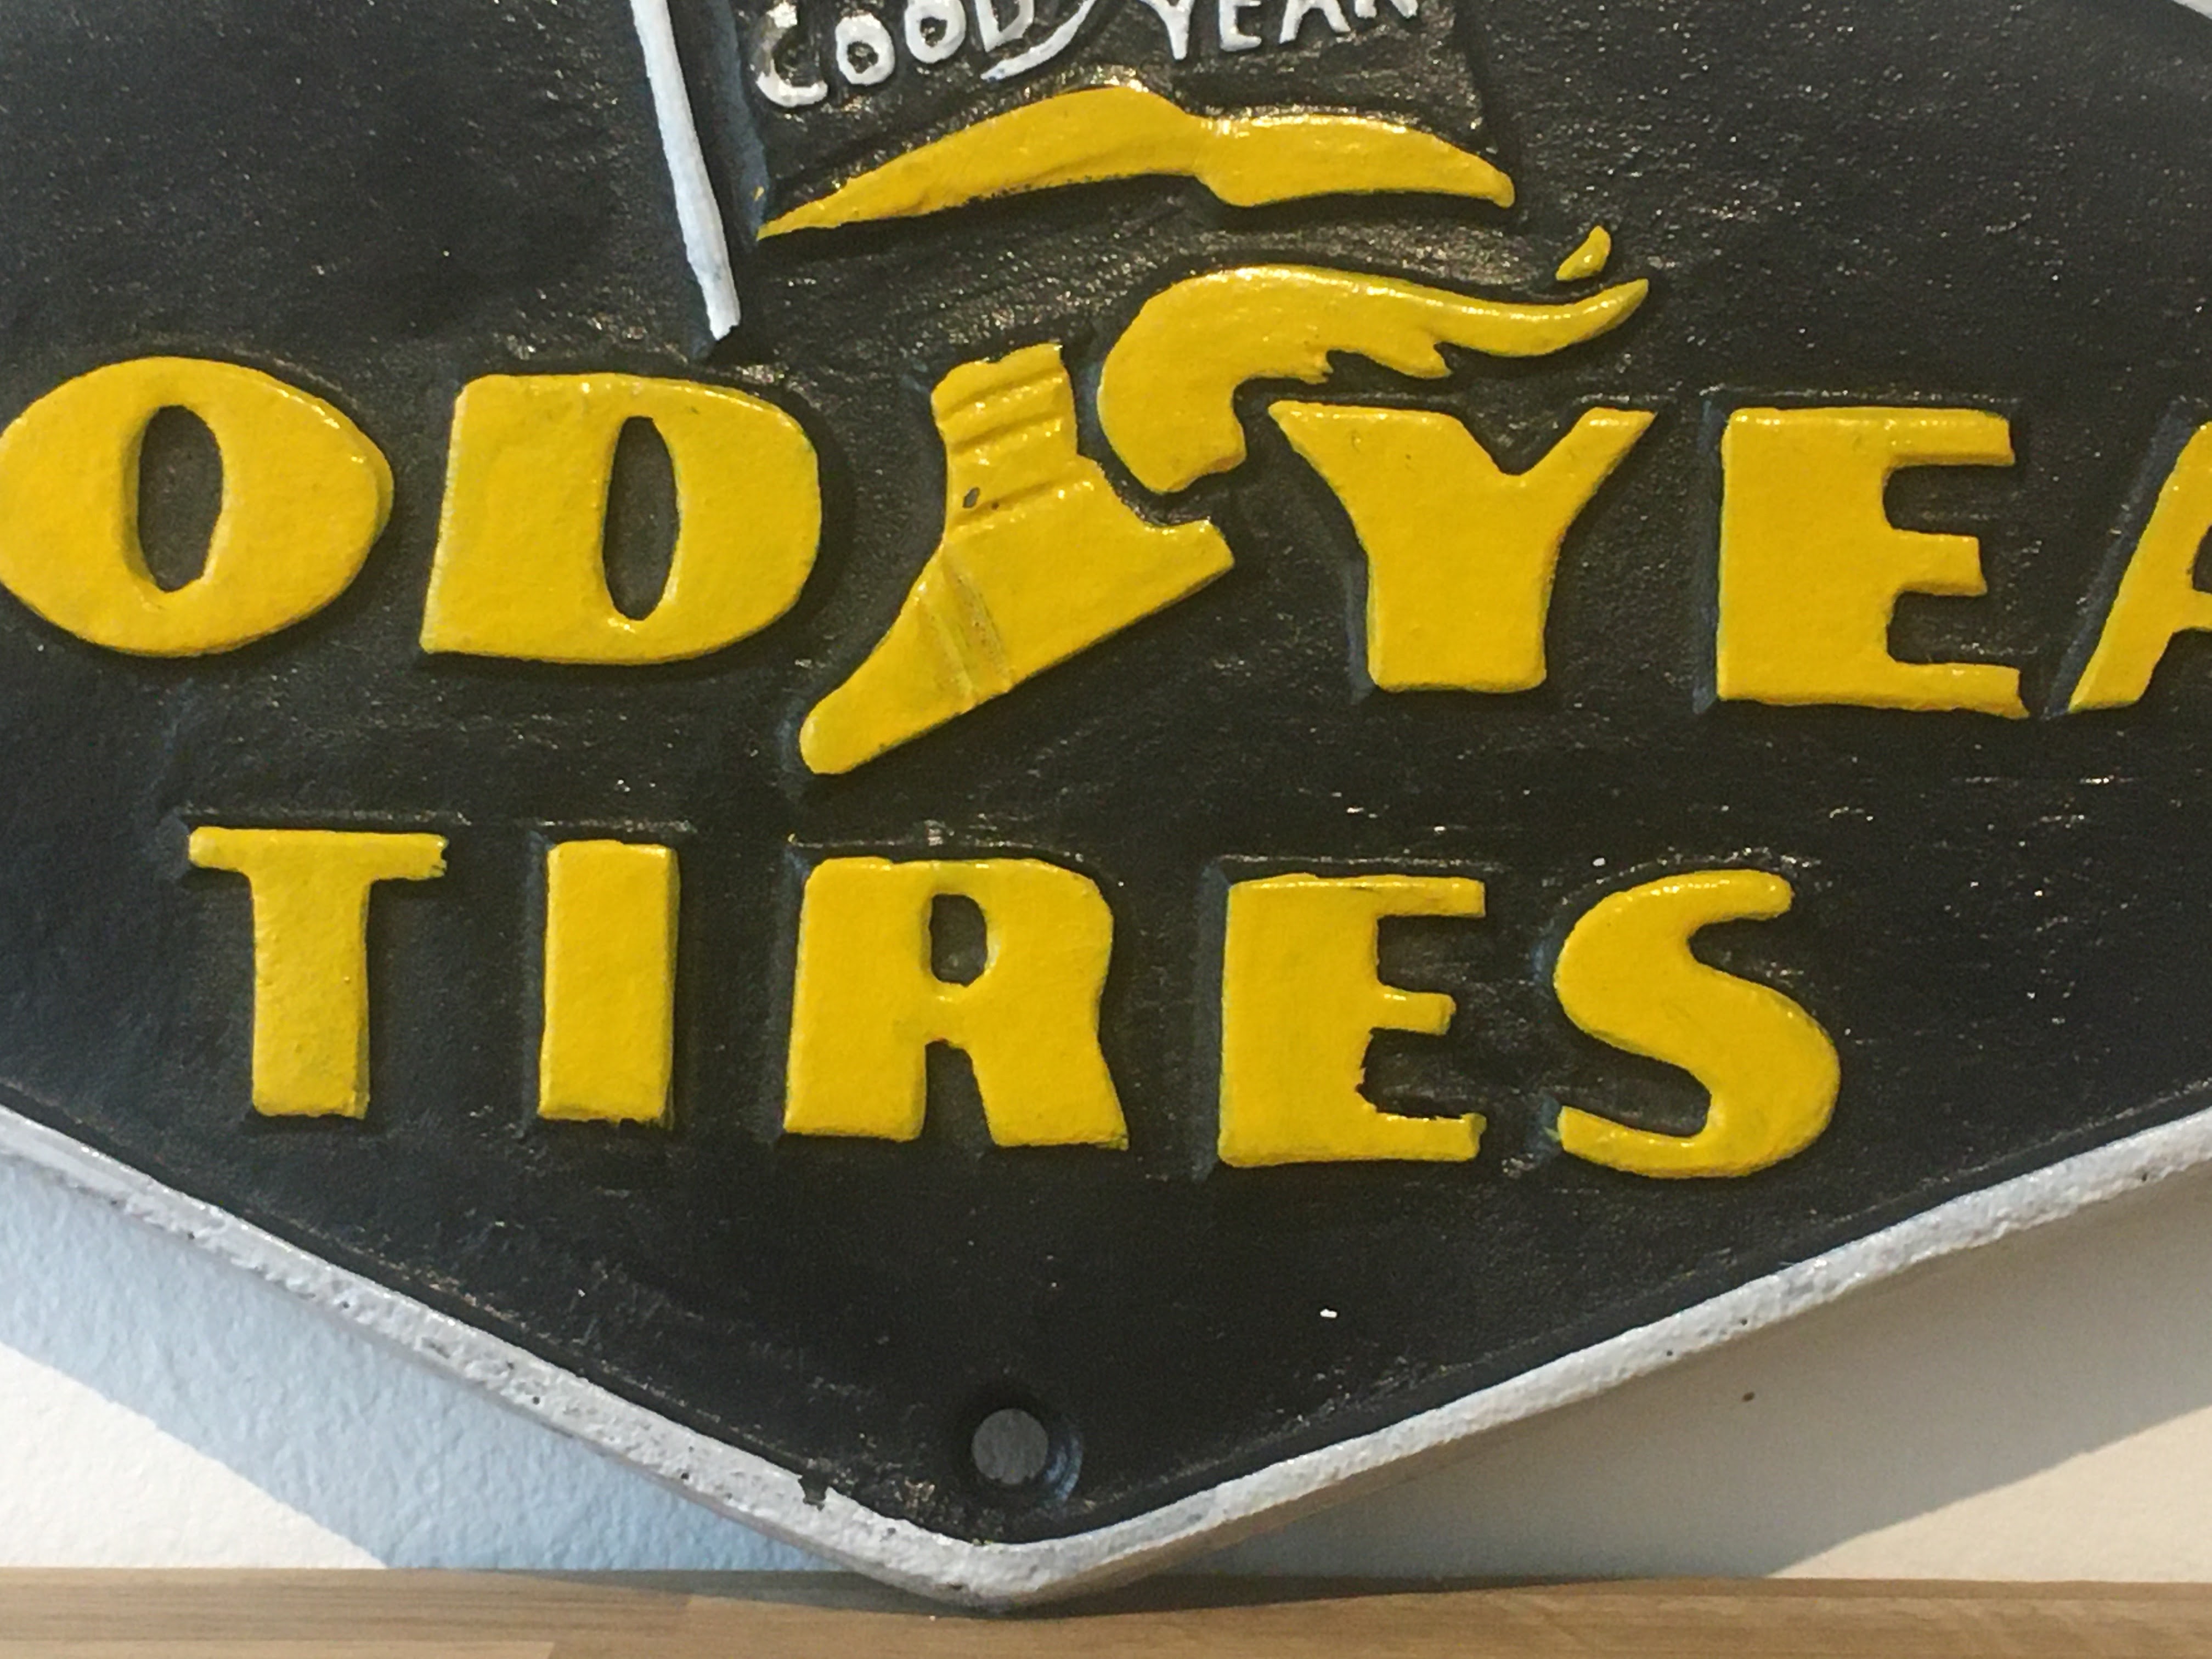 Good Year Tyres Cast Iron Sign - Image 4 of 4